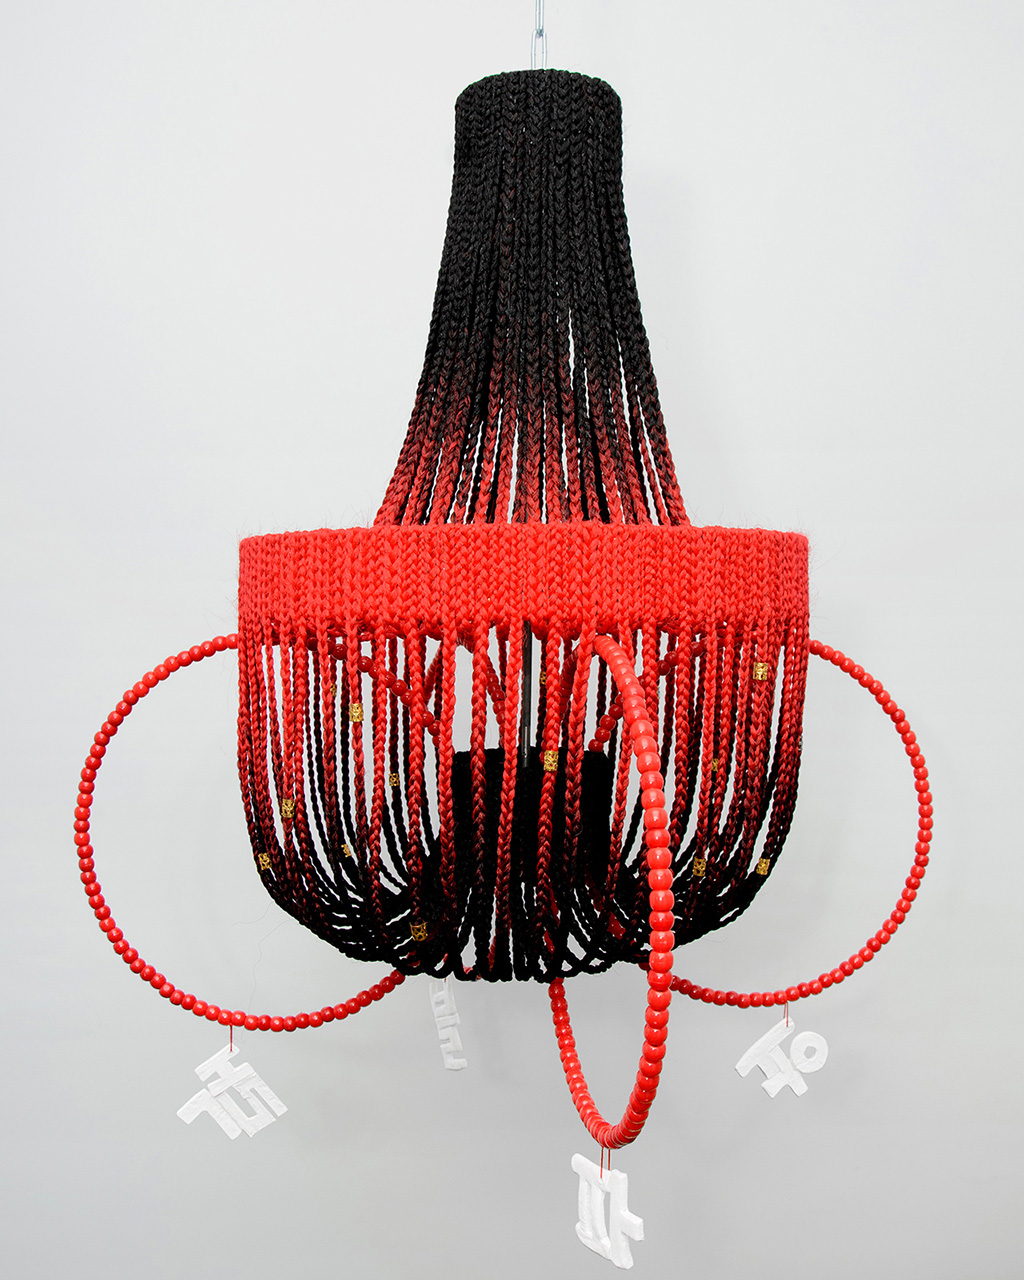 a lamp in red and black